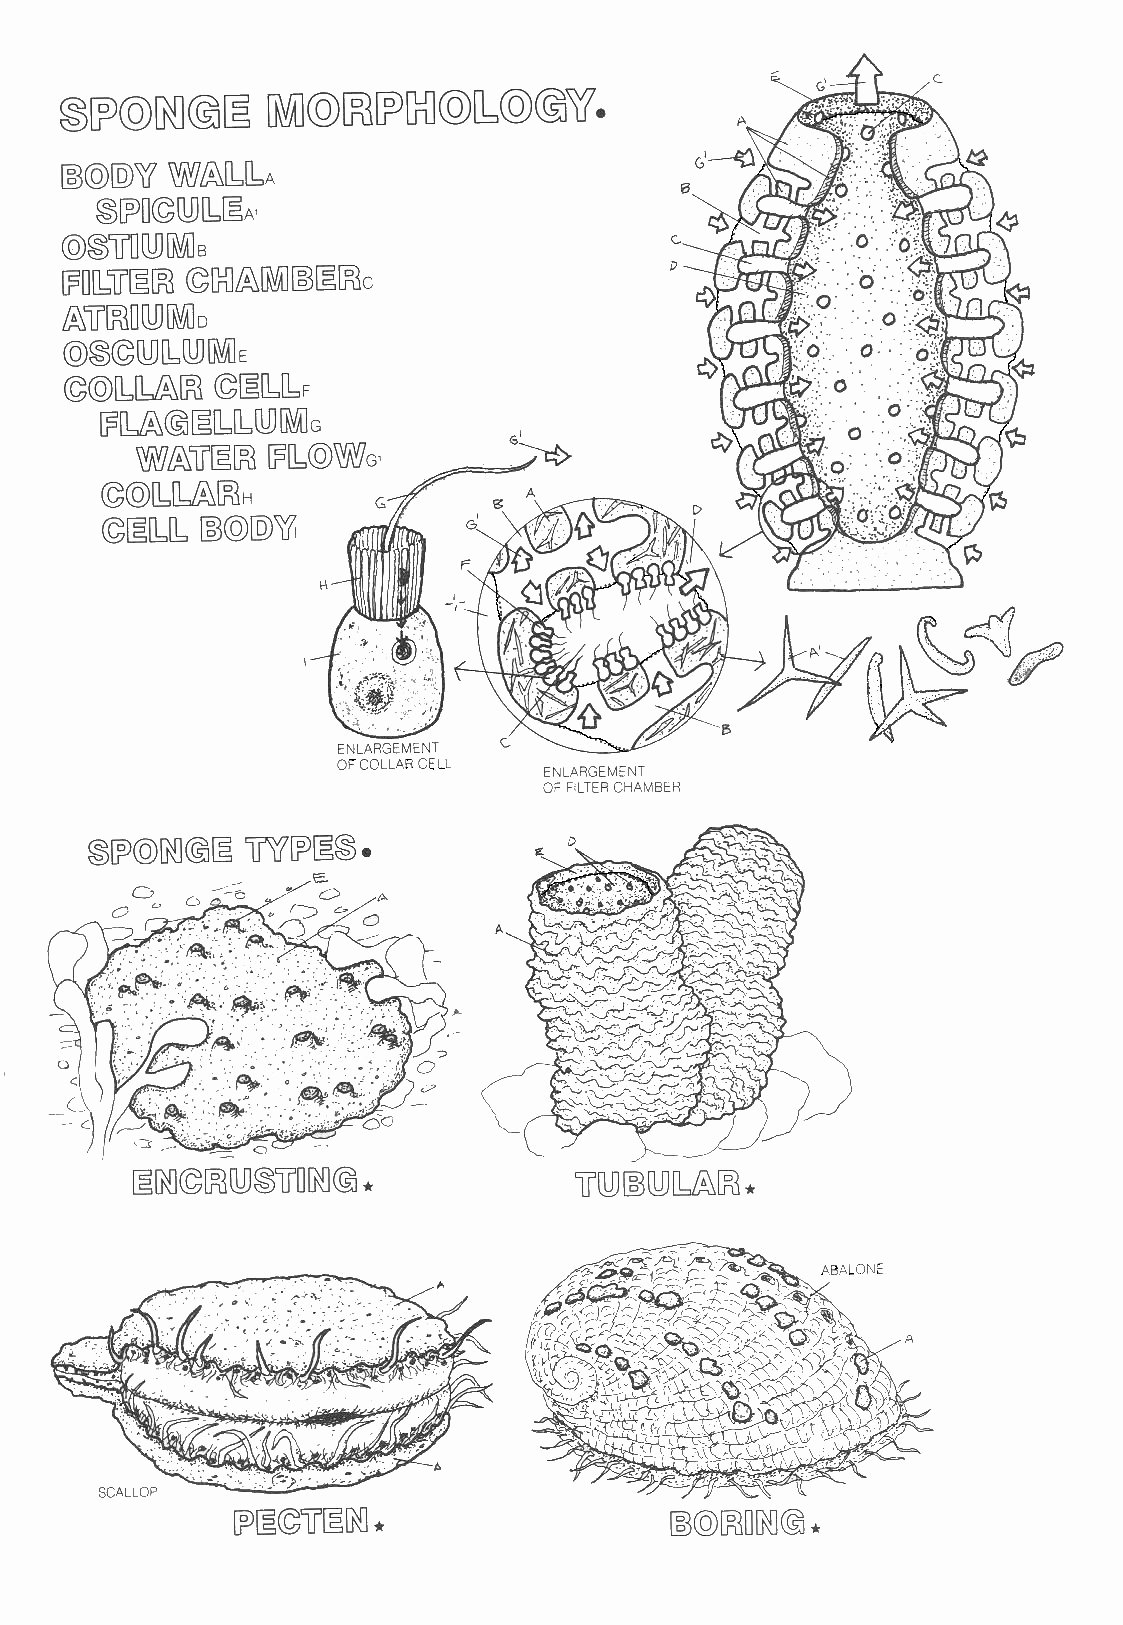 Sponges A Coloring Worksheet Awesome Sponges Coloring Worksheet Key Questions A Coloring Pages